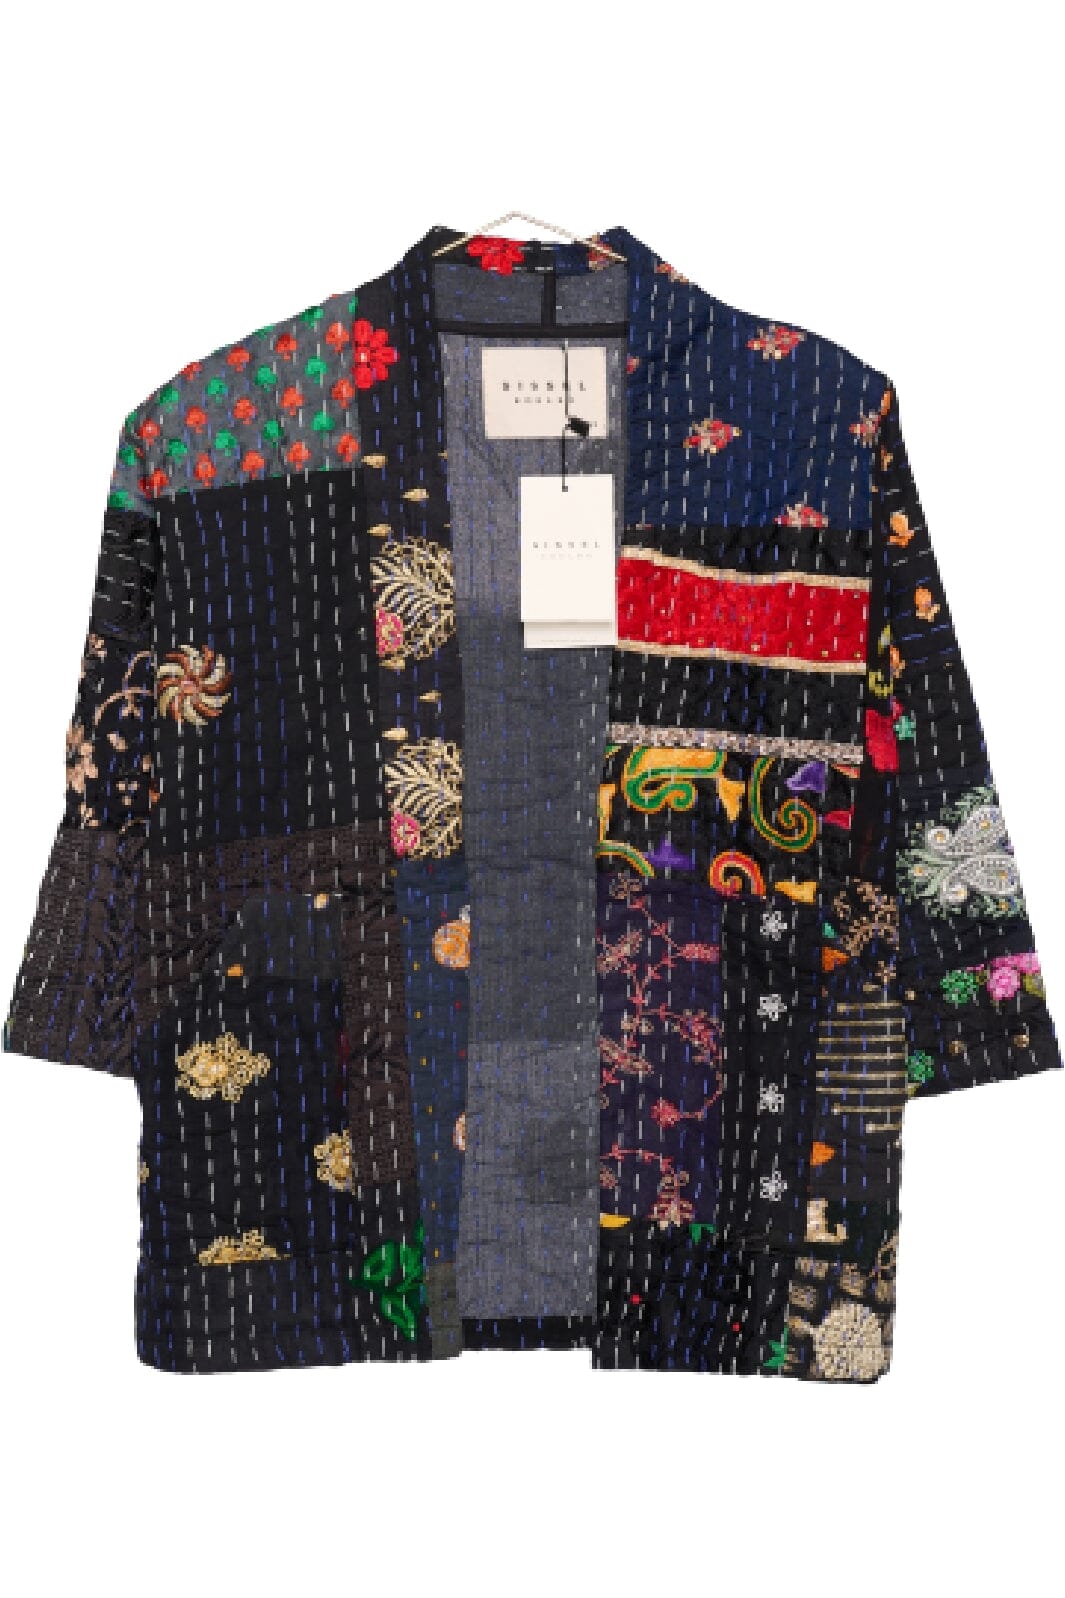 Sissel Edelbo - Tallulah Embroidery Patchwork Jacket,Tallulah Embroidery Patchwork Jacket - No. 388 Jakker 